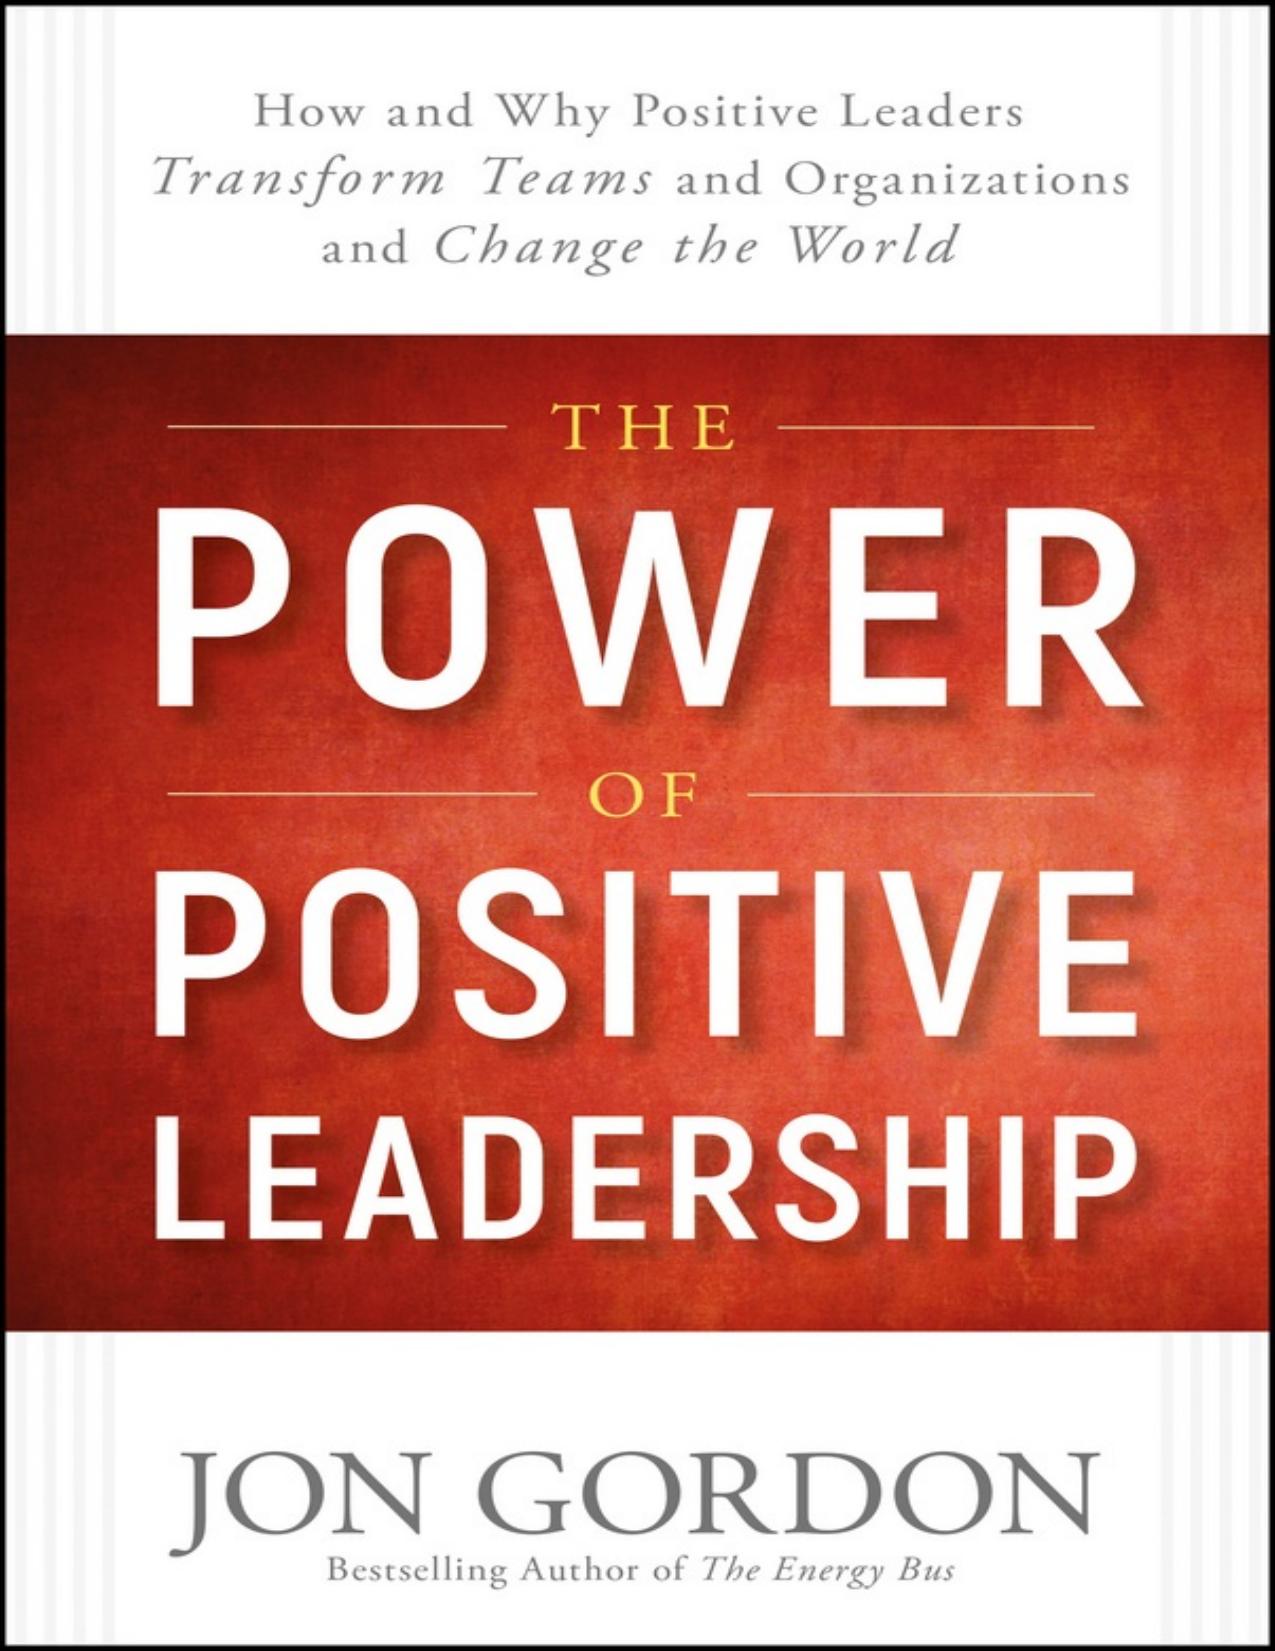 The Power of Positive Leadership: How and Why Positive Leaders Transform Teams and Organizations and Change the World - PDFDrive.com